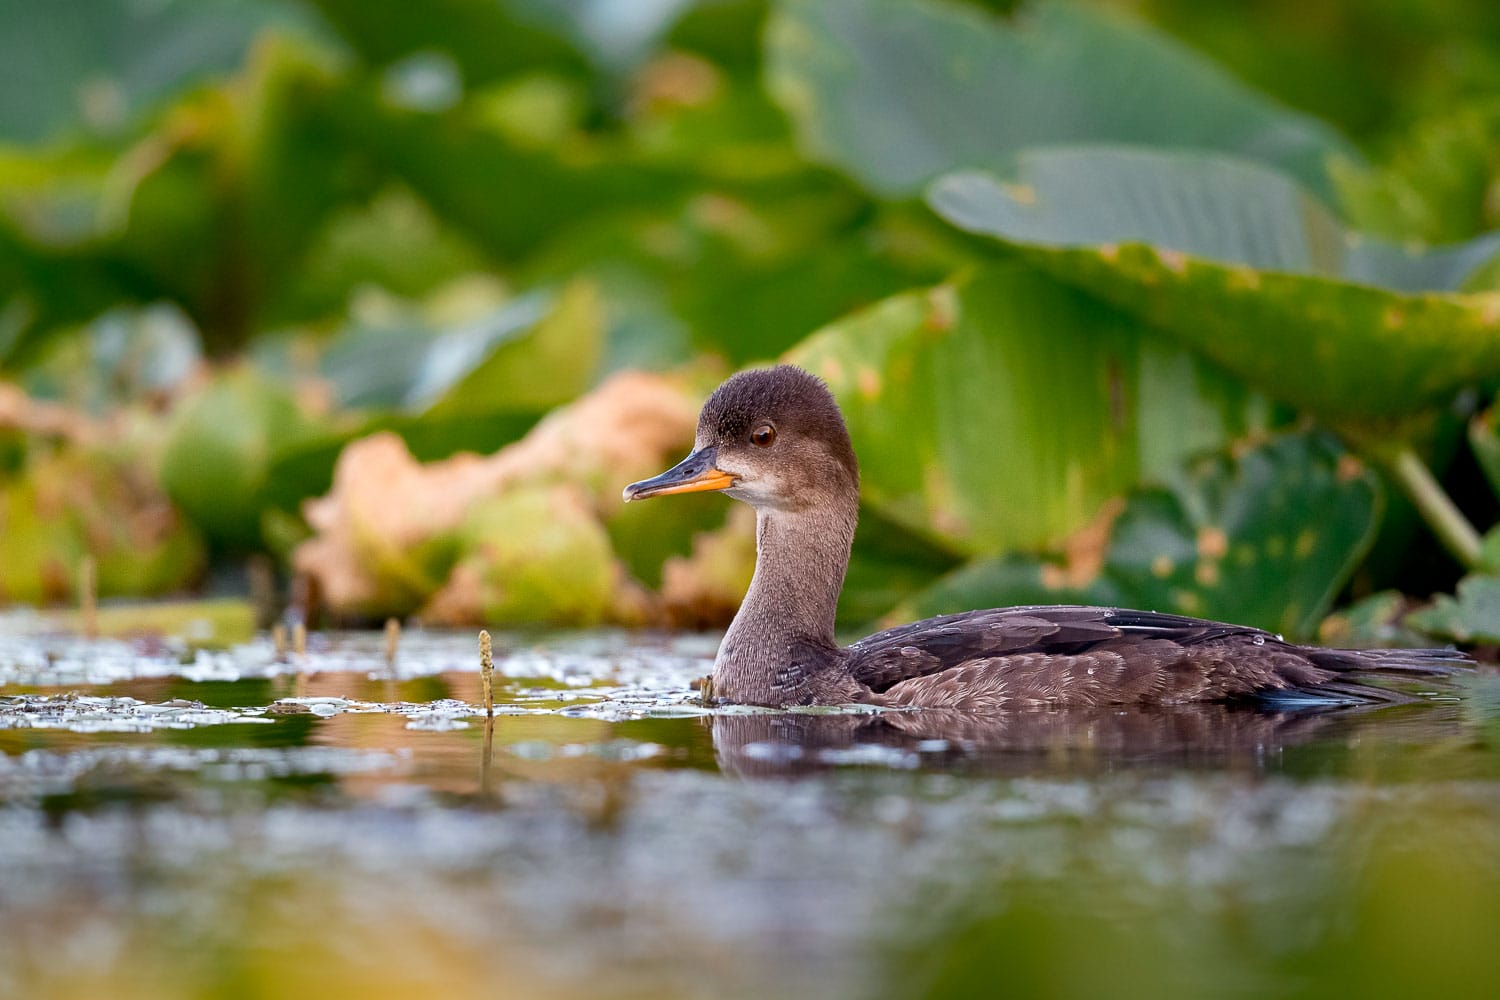 A duck swimming serenely among lily pads.